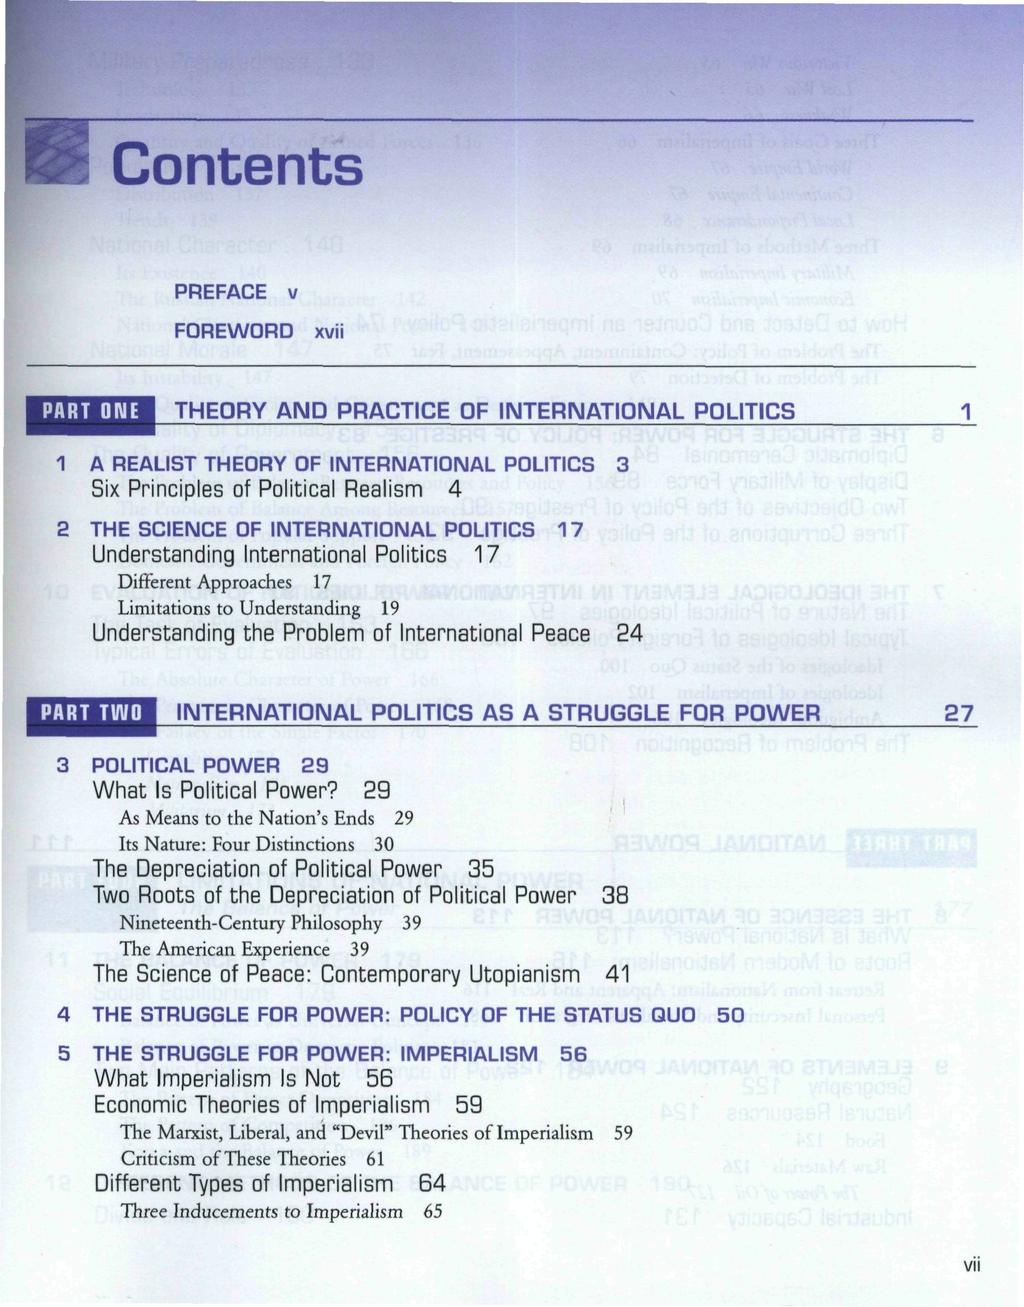 I Contents PREFACE v FOREWORD xvii PART ONE THEORY AND PRACTICE OF INTERNATIONAL POLITICS A REALIST THEORY OF INTERNATIONAL POLITICS 3 Six Principles of Political Realism 4 THE SCIENCE OF